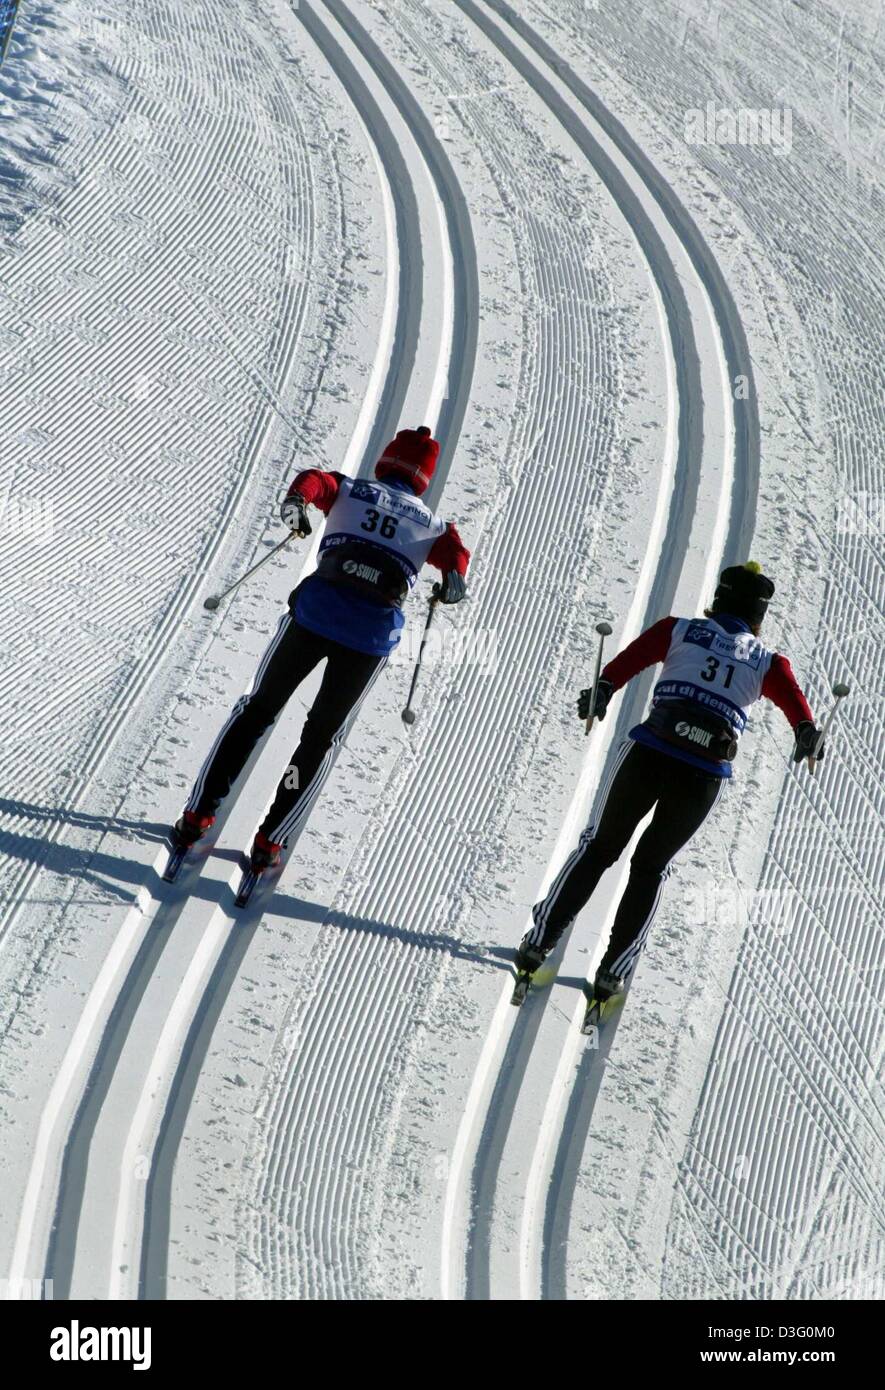 (dpa) - Two cross-country skiers train in preparation for the Nordic Skiing World Championship in Val di Fiemme, Italy 17 February 2003. The women's classic style 15 kilometer race is the first competition to take place. The world championship lasts from 18 February until 1 March 2003. Stock Photo